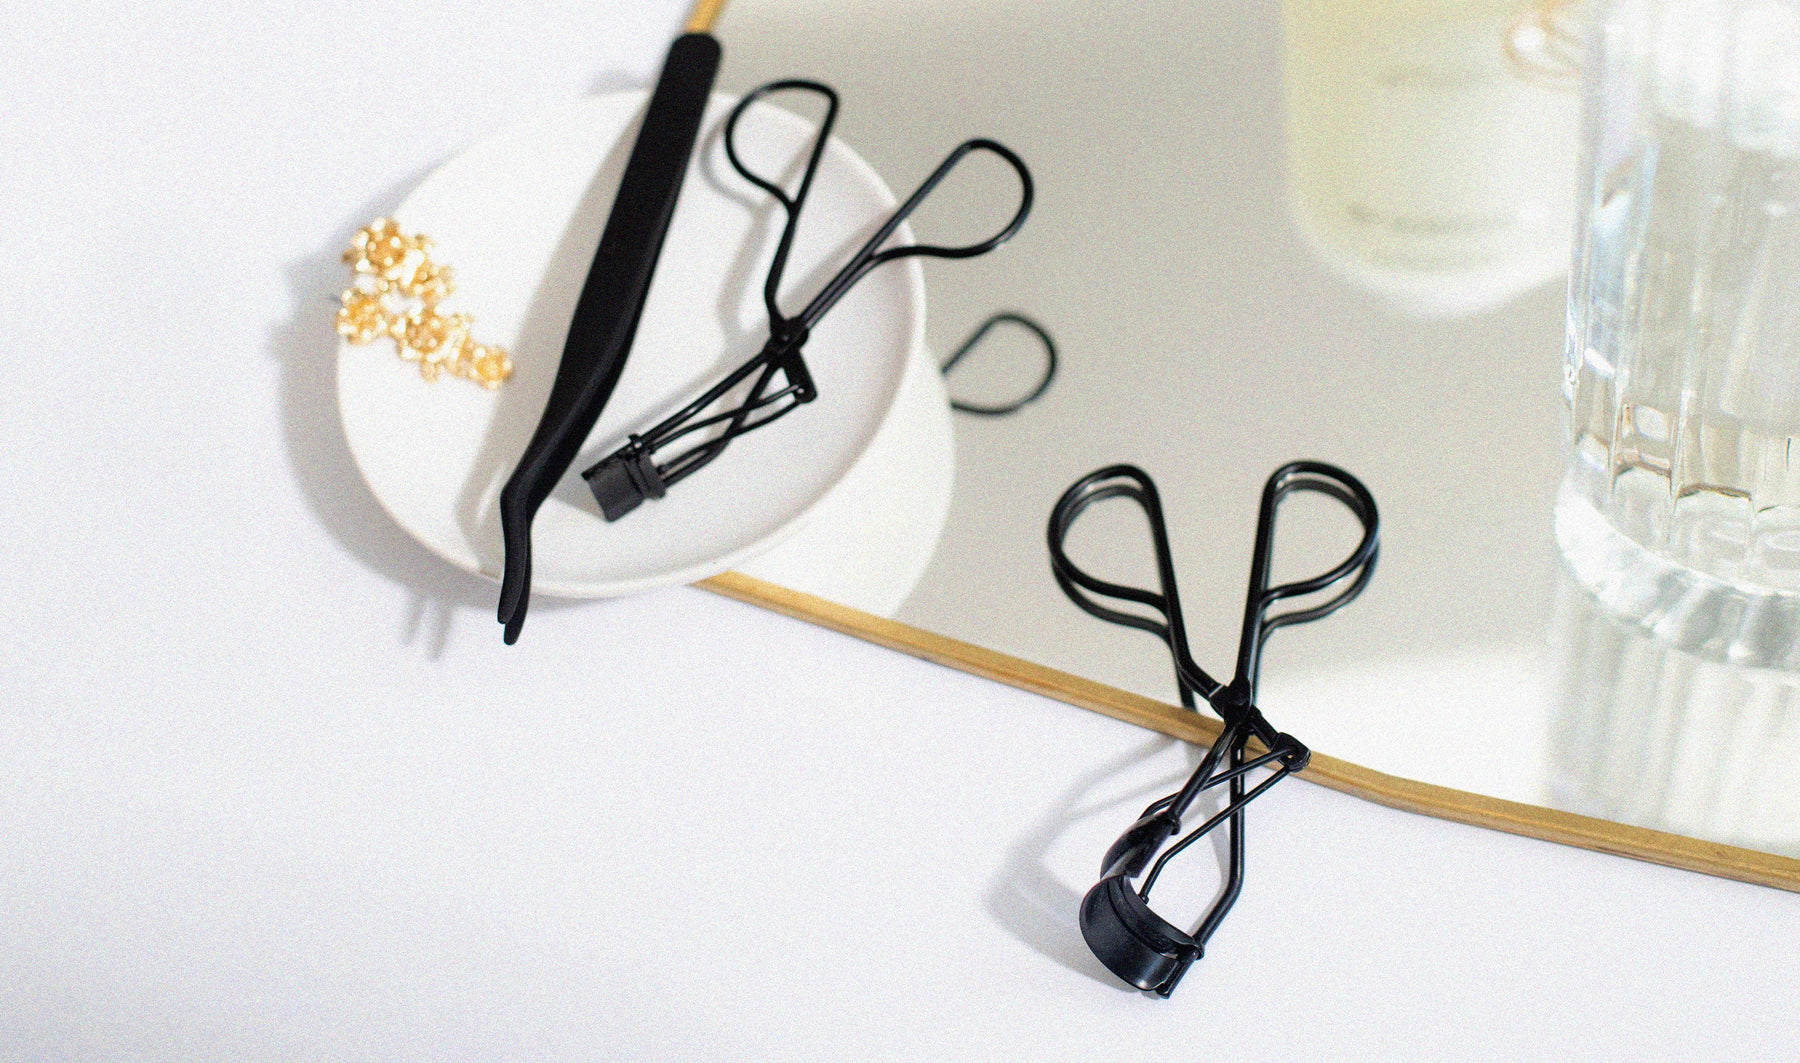 Matte black Lithe Lash Applicator on a stylish plate, next to black Lithe Mini Lash Curler and Lithe Lash Curler on a white and light grey back ground, resting partially on a stylish clear and clean mirror 